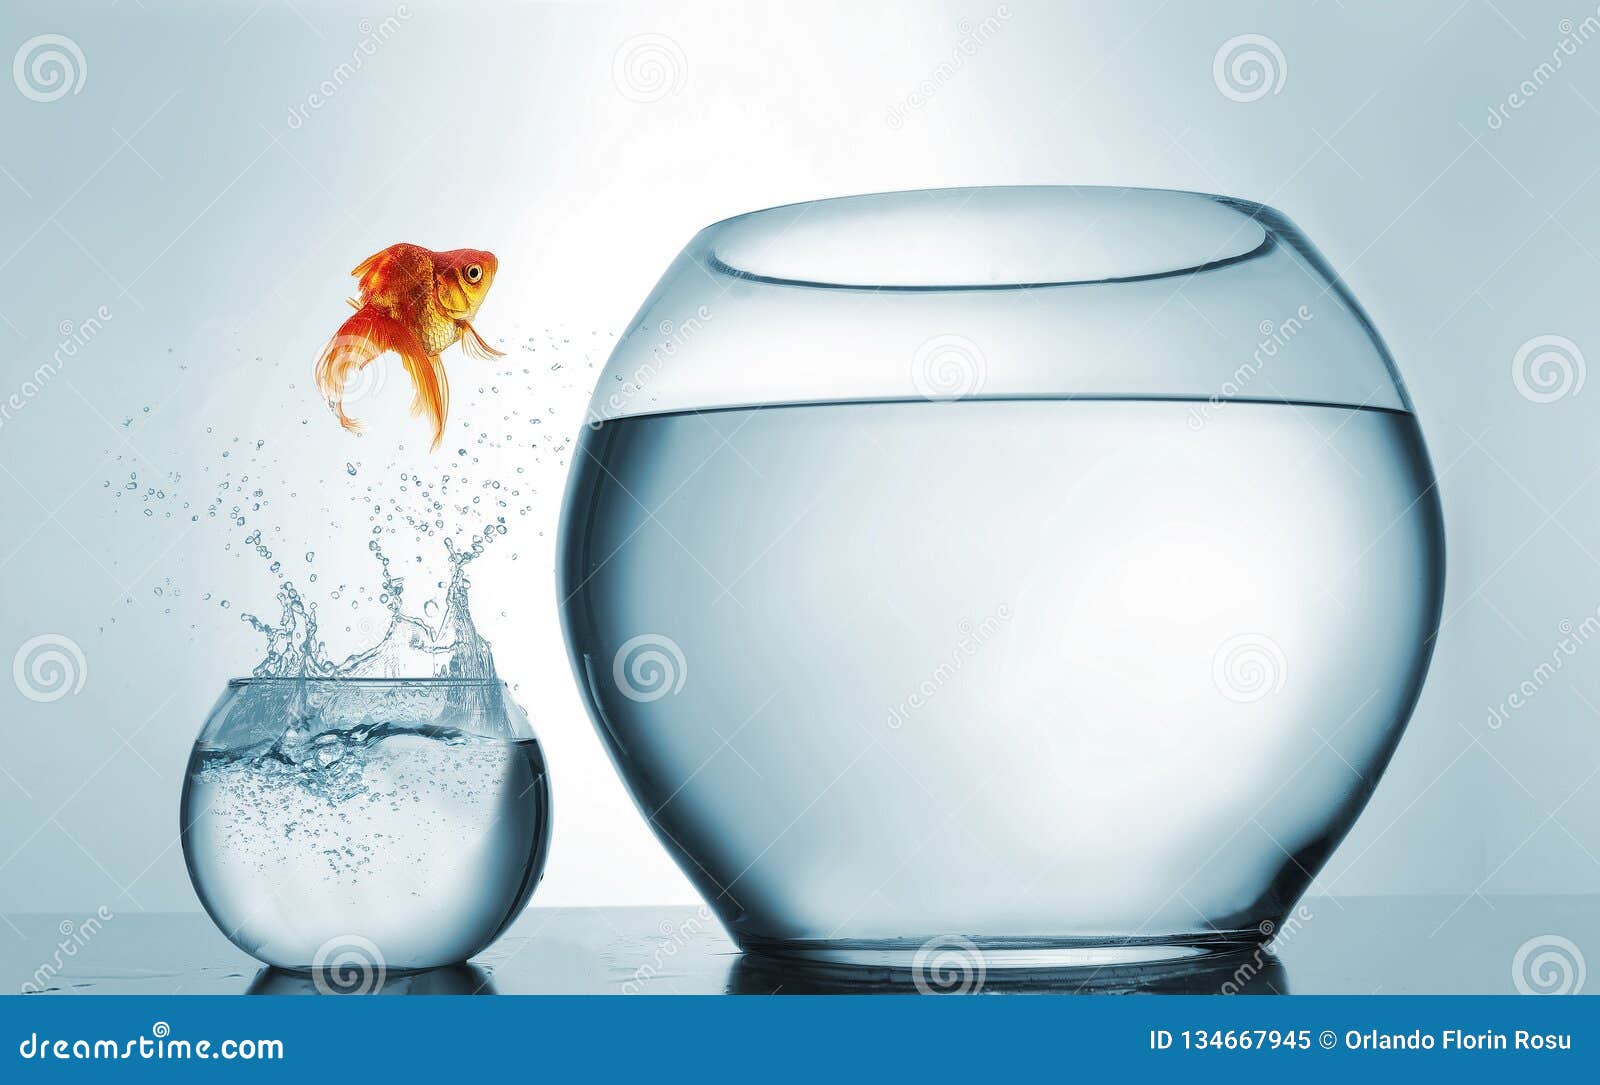 goldfish jumping in a bigger bowl - aspiration and achievement concept